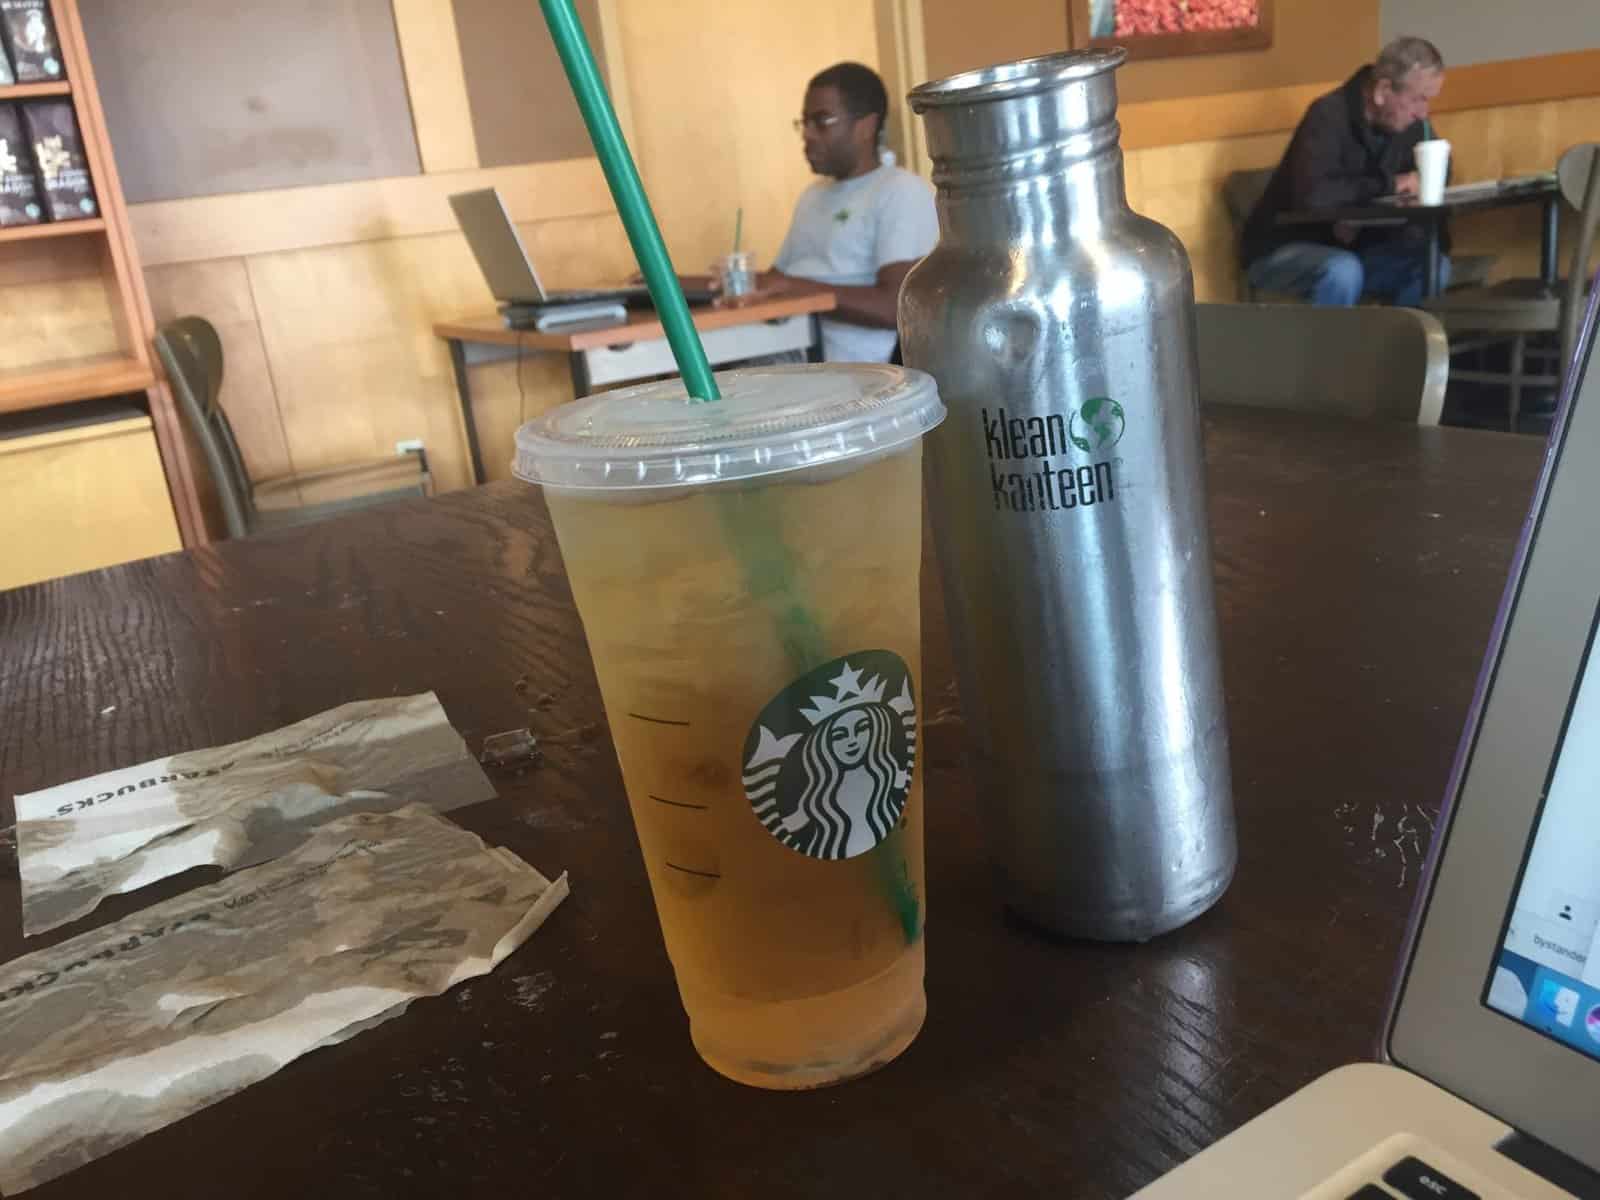 Indoors. A plastic Starbucks container of iced green tea and a dented, silver reusable Klean Kanteen brand water bottle sit on a dark wood grain table. To the left of them, two brown Starbucks napkins are soaked with liquid and ice. Other customers in the background.